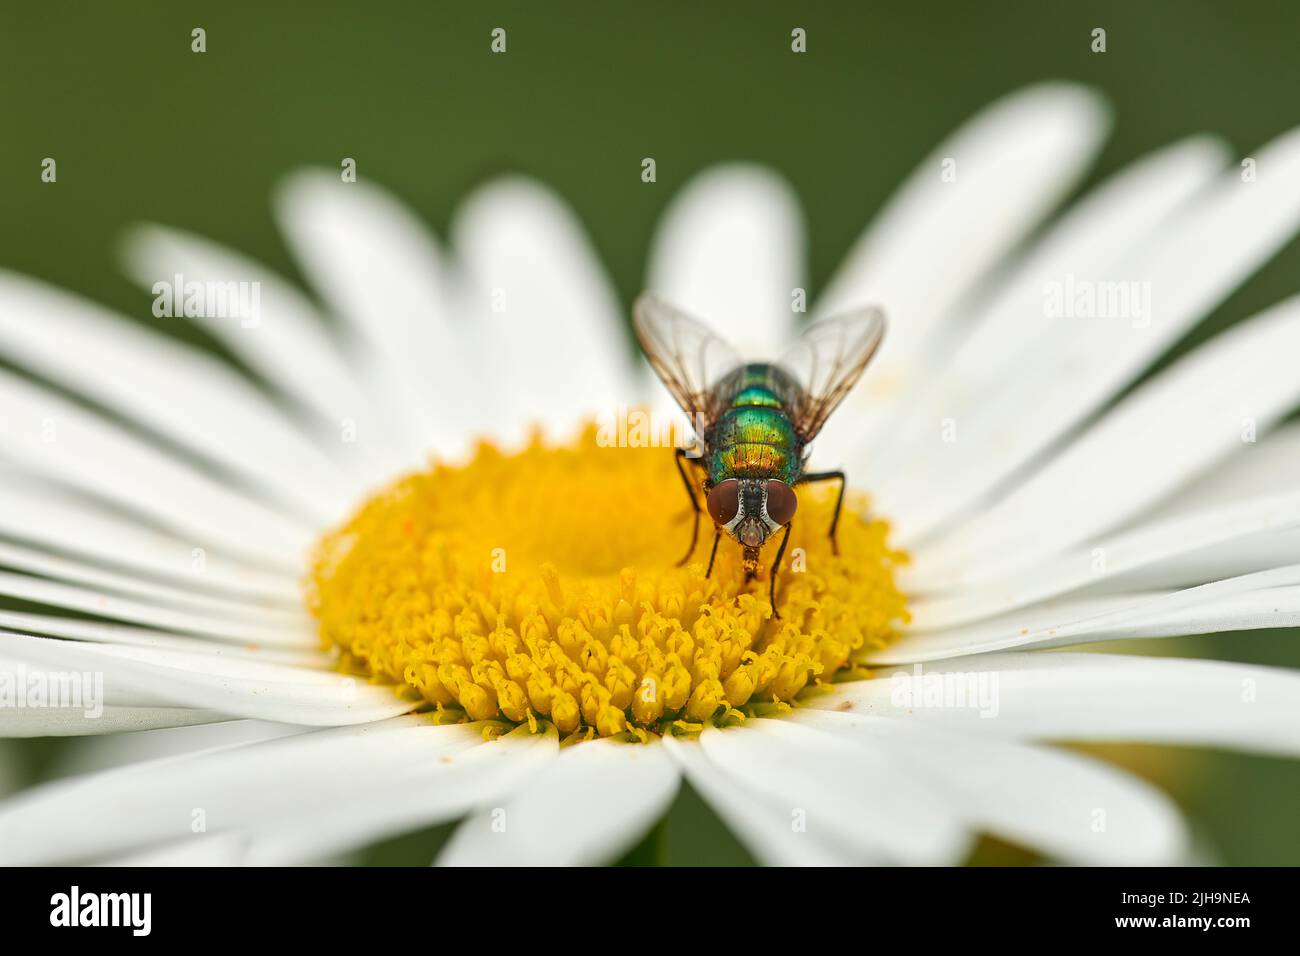 Closeup of a fly feeding of nectar on a white Marguerite daisy flower in a private or secluded home garden. Macro and texture detail of common green Stock Photo